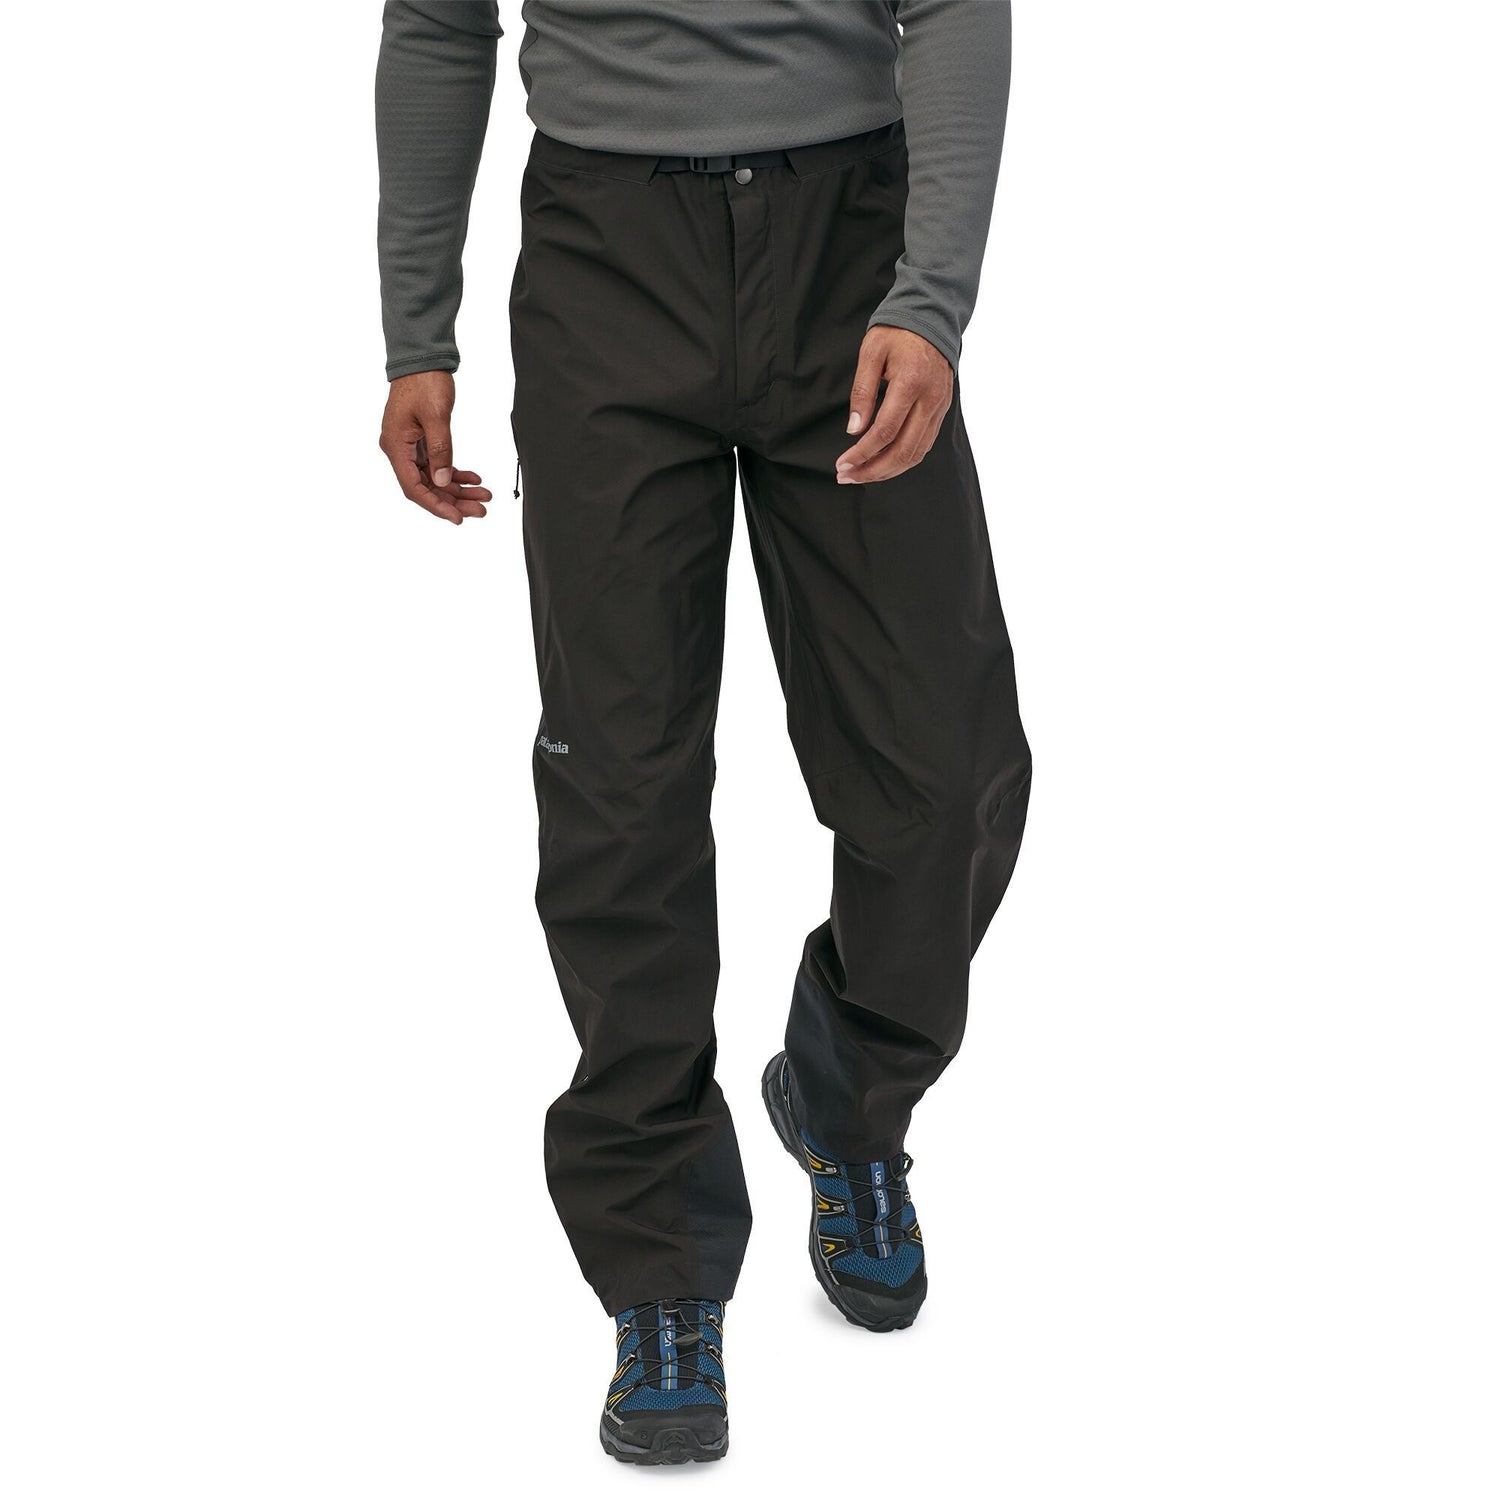 Patagonia - M's Calcite Pants - Gore-Tex - Recycled Polyester - Weekendbee - sustainable sportswear